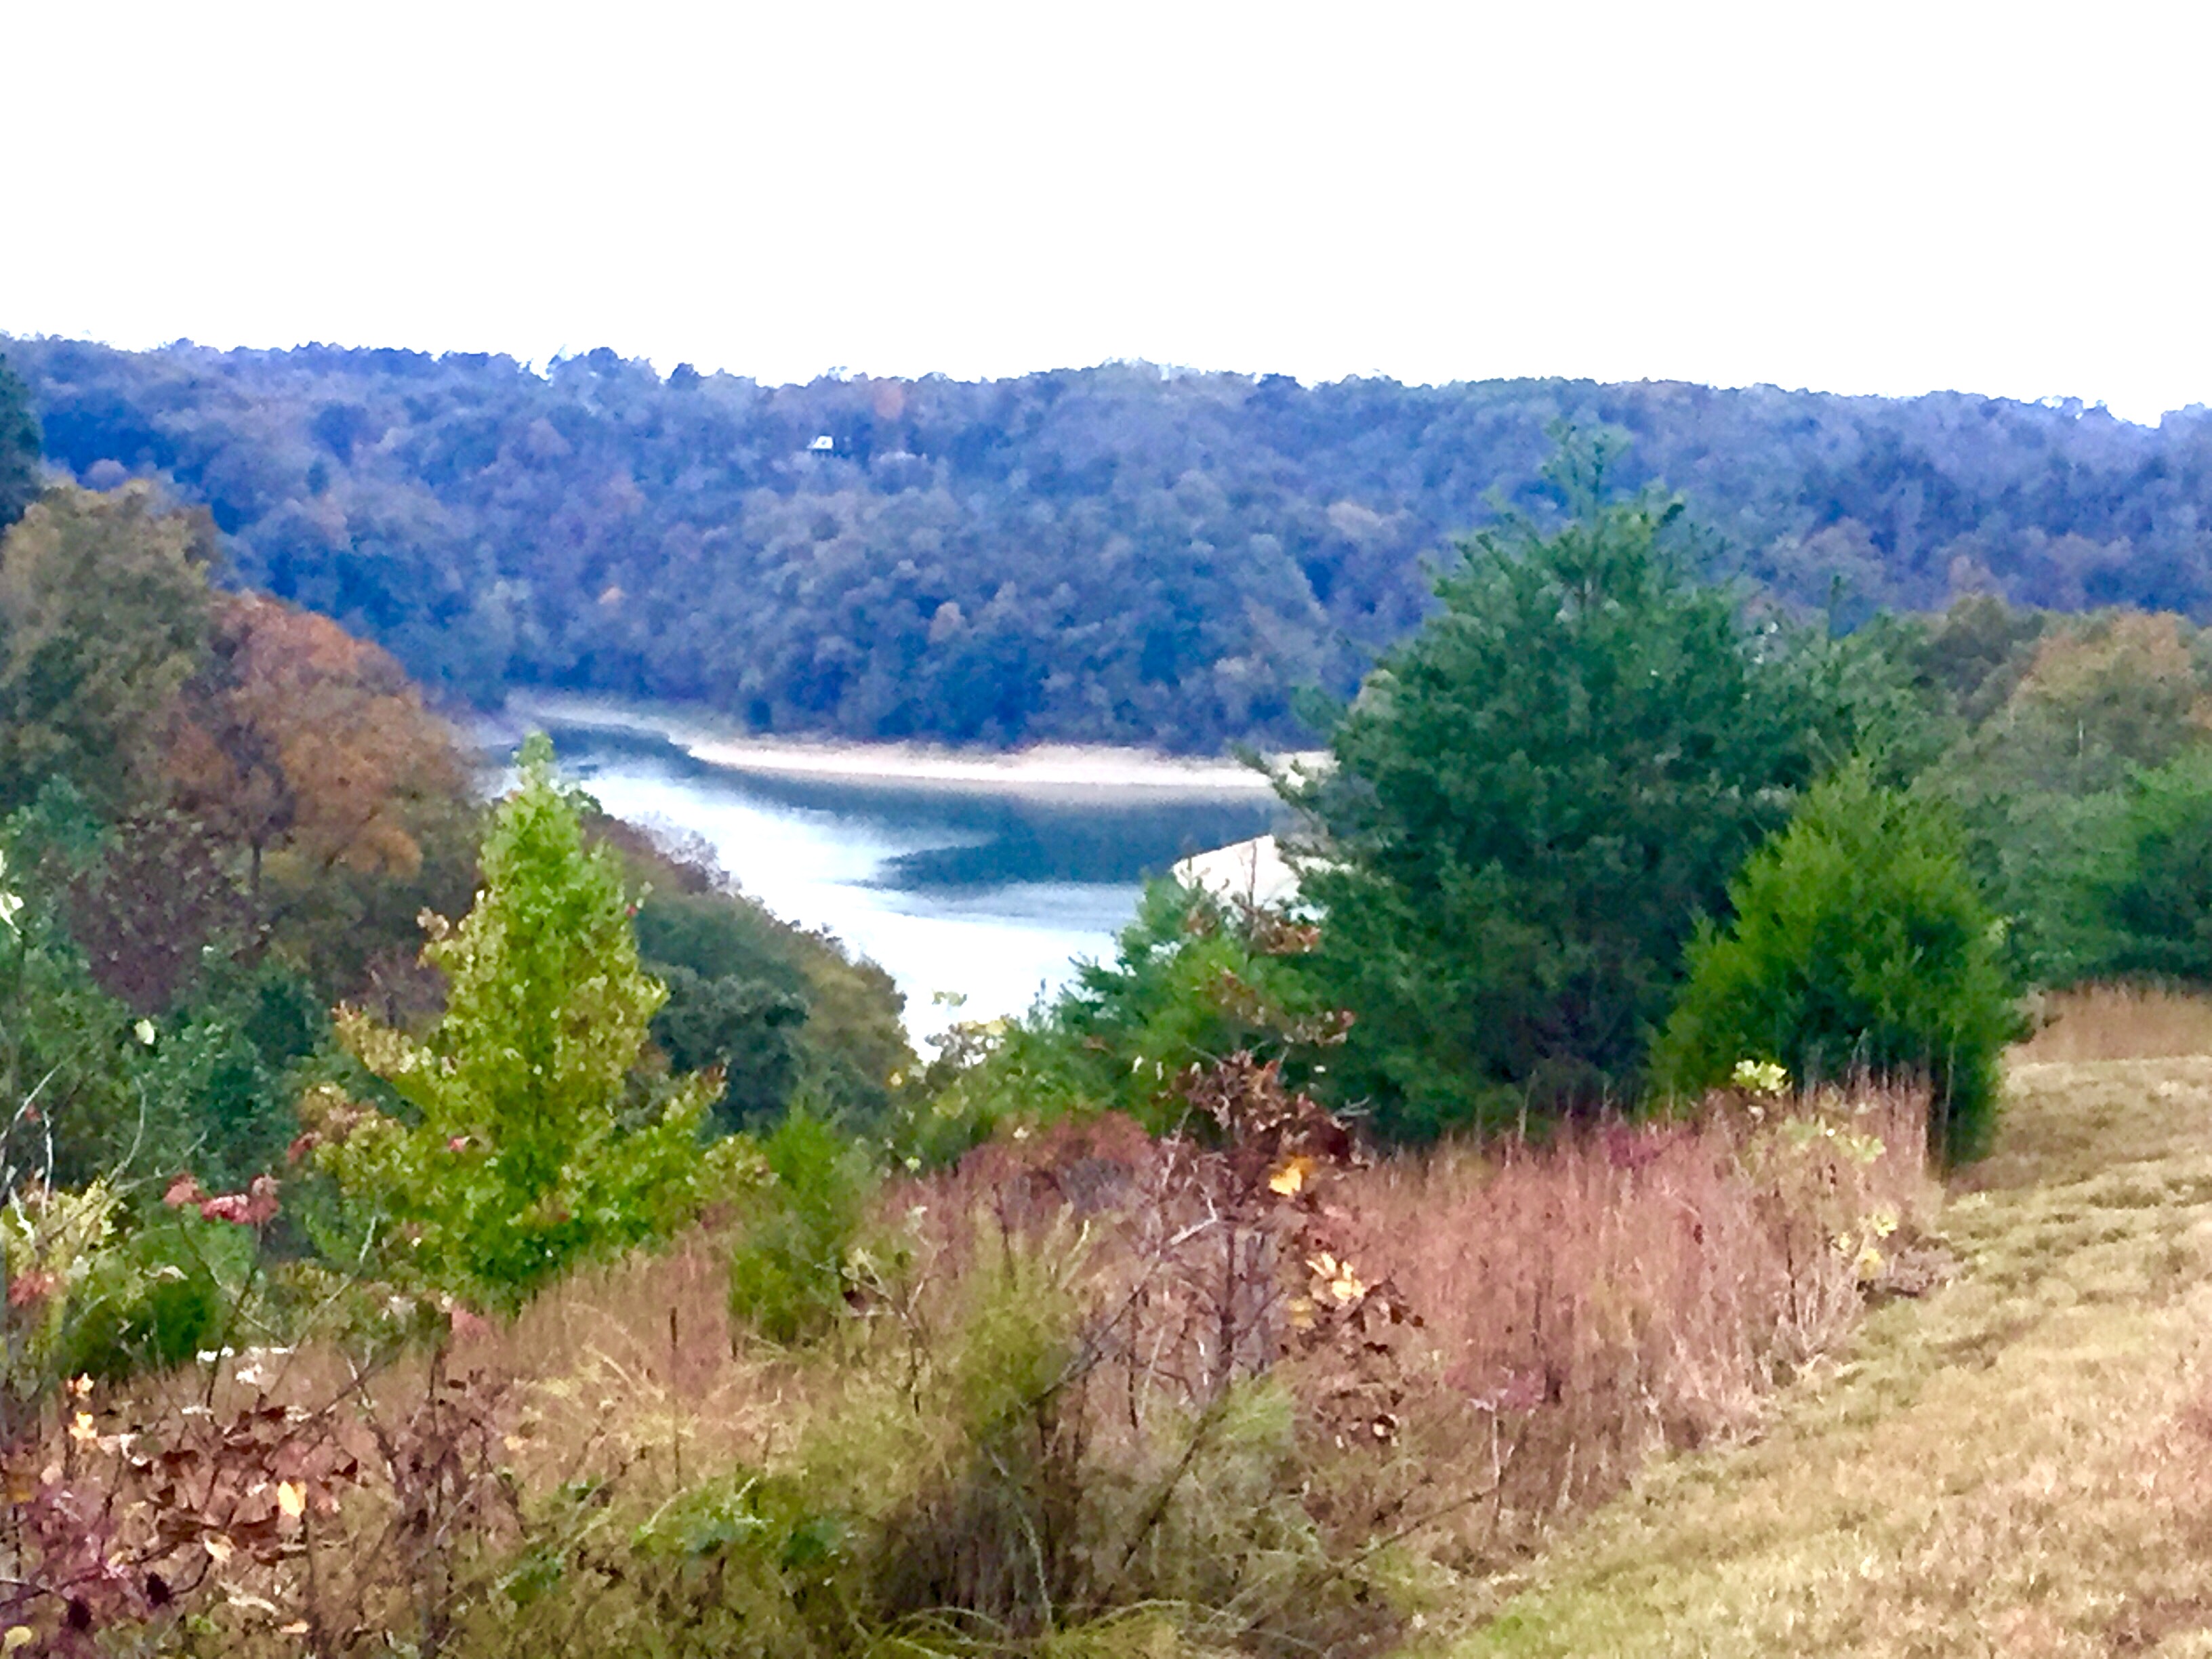 #LAKECUMBERLAND LAKE VIEW<br />Online Only - Near Alligator Dock &amp; KOA<br />NO RESERVE ABSOLUTE <br />REAL ESTATE AUCTION<br />Ending Tuesday November 29th at Approx. 6 pm CST.<br /><br />Lake View Lot on Beautiful Lake Cumberland, being Lot  #75 of the gated Parks Ridge Development. Lot Features 1.09 Acres m/l and corners at the Corps of Engineers Lake Boundary. Property offers blacktop street frontage on a private cul-de-sac, plus community amenities including golf putting green and playground area.<br /><br />Auction held for Francis and Polly Comtois<br /><br />Visit our Website at http://goldenruleauction.com/auction-details.php?id=135 for more information, or give us a call @ 270-866-6600. Chris Wilson Auctioneer!